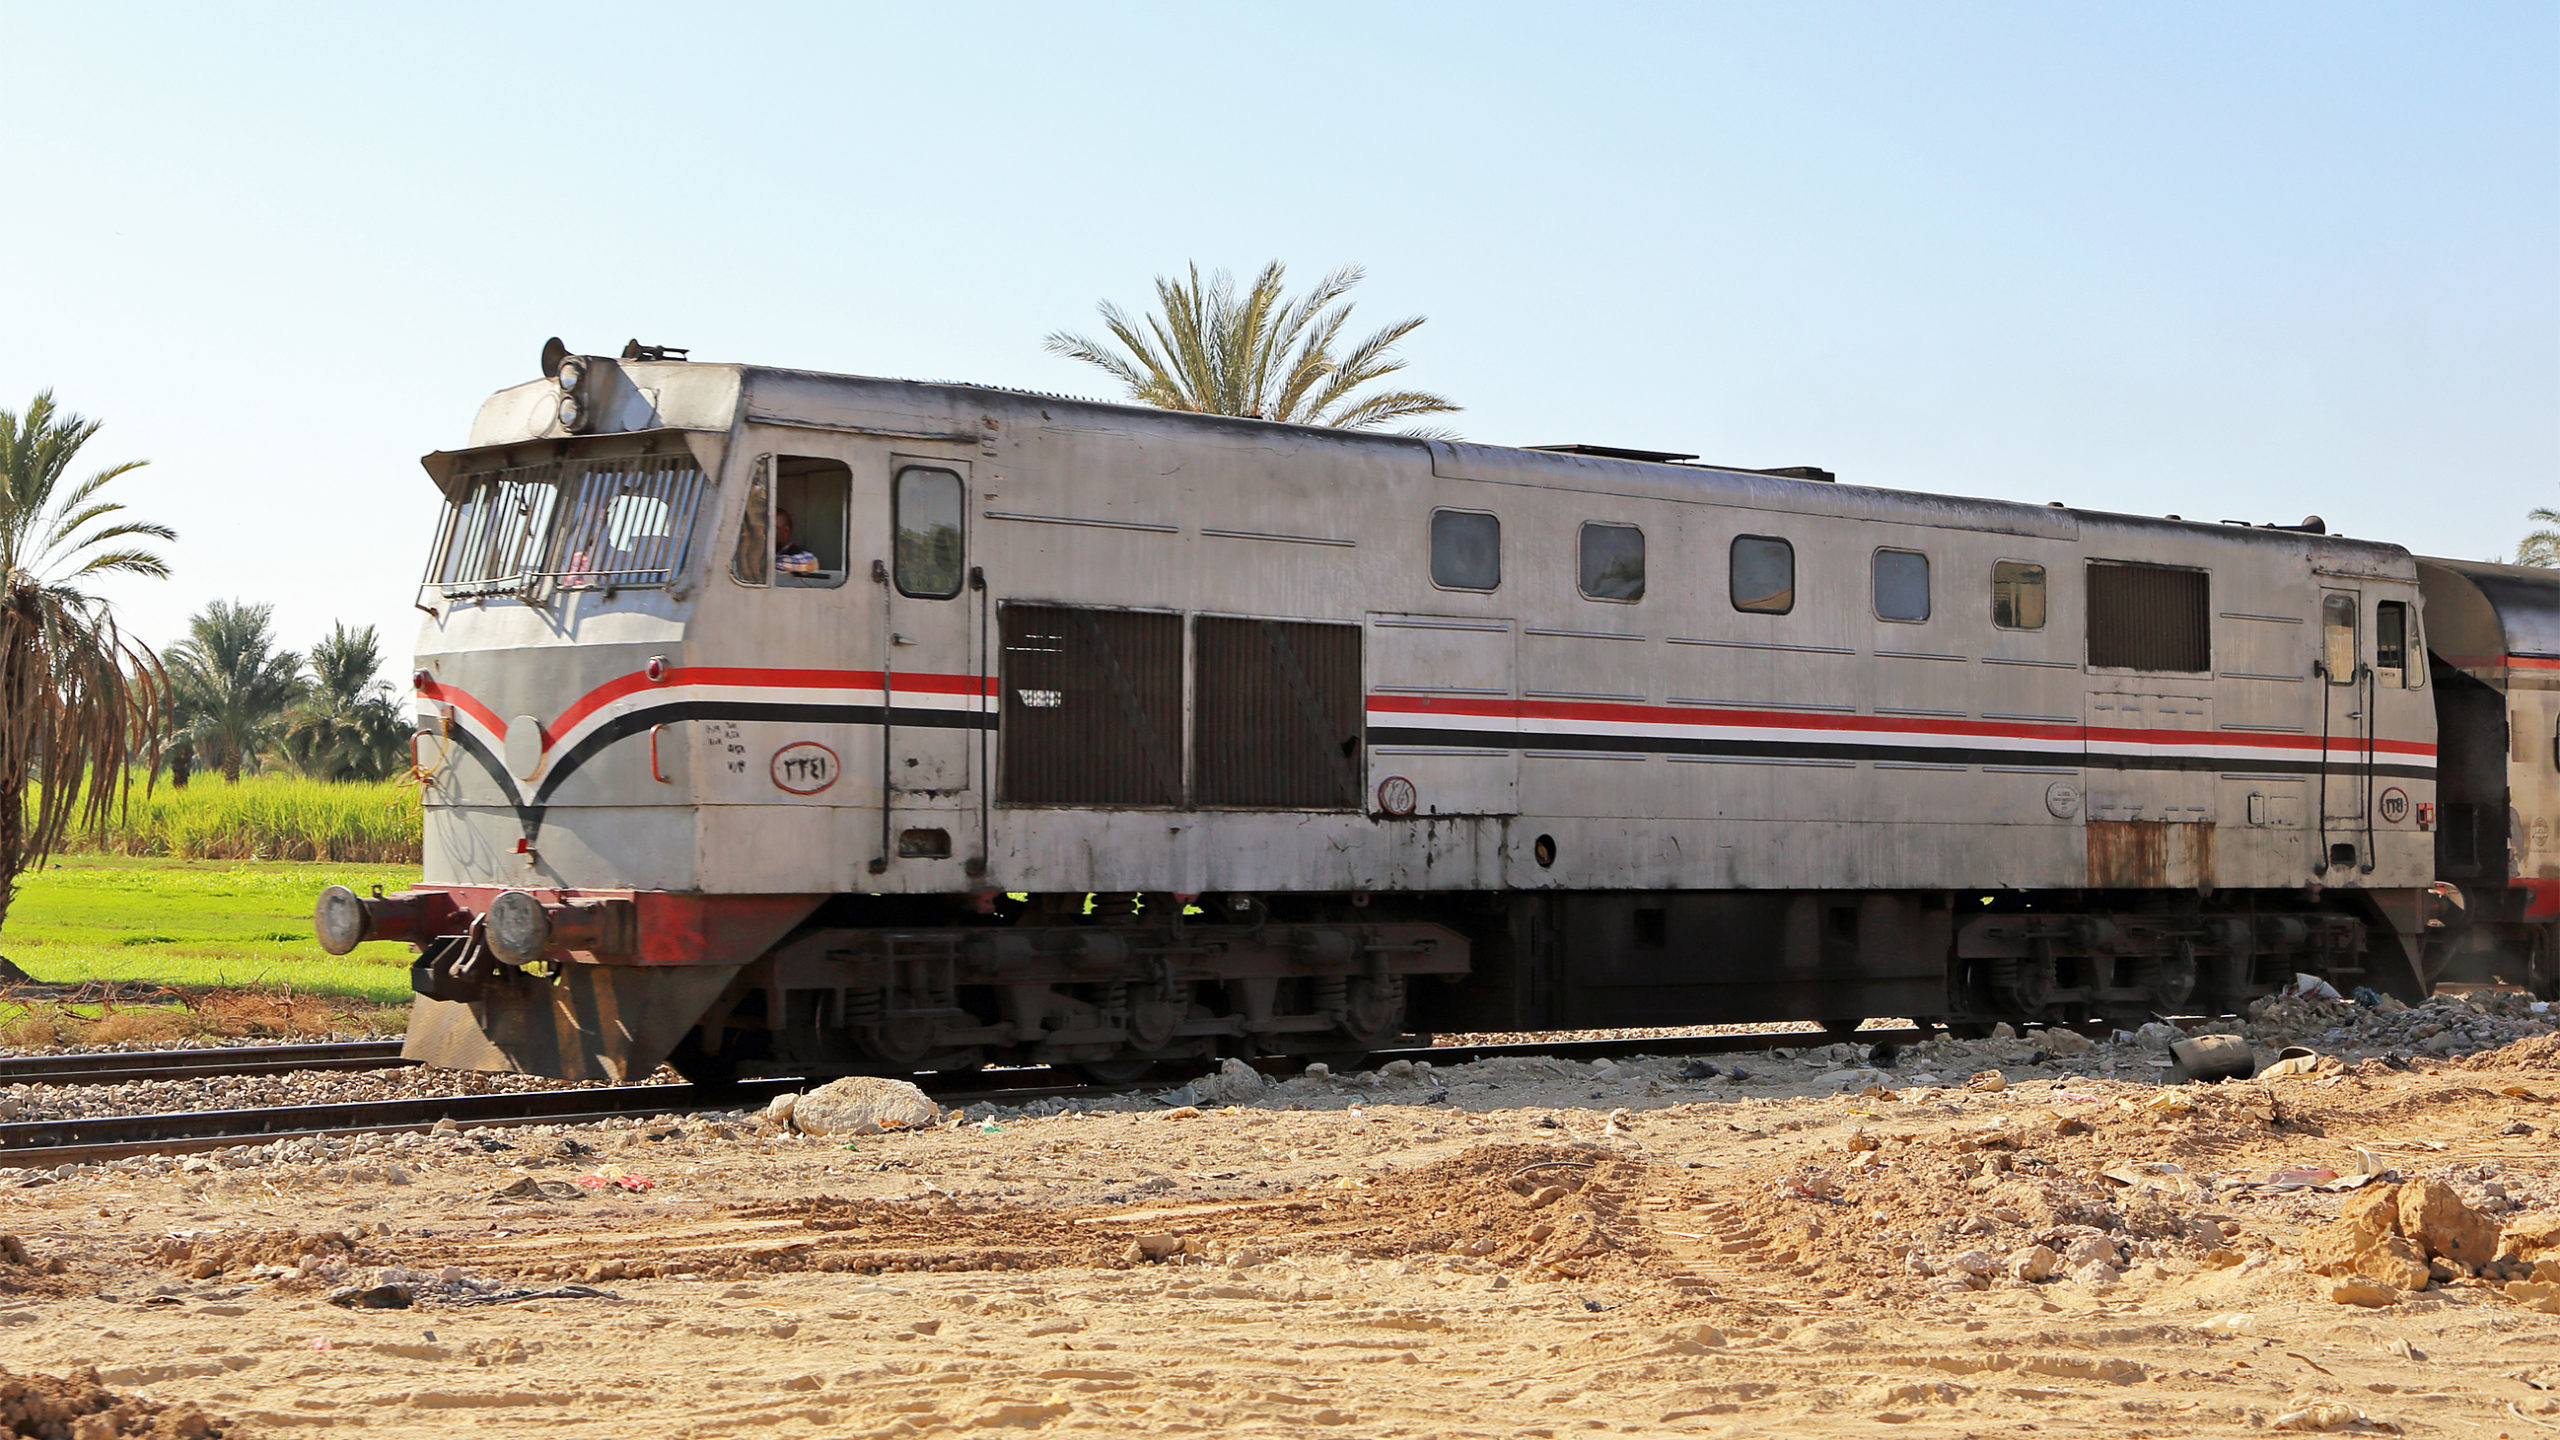 Egypt’s Railways Chief Fired In Wake of Fatal Train Accident